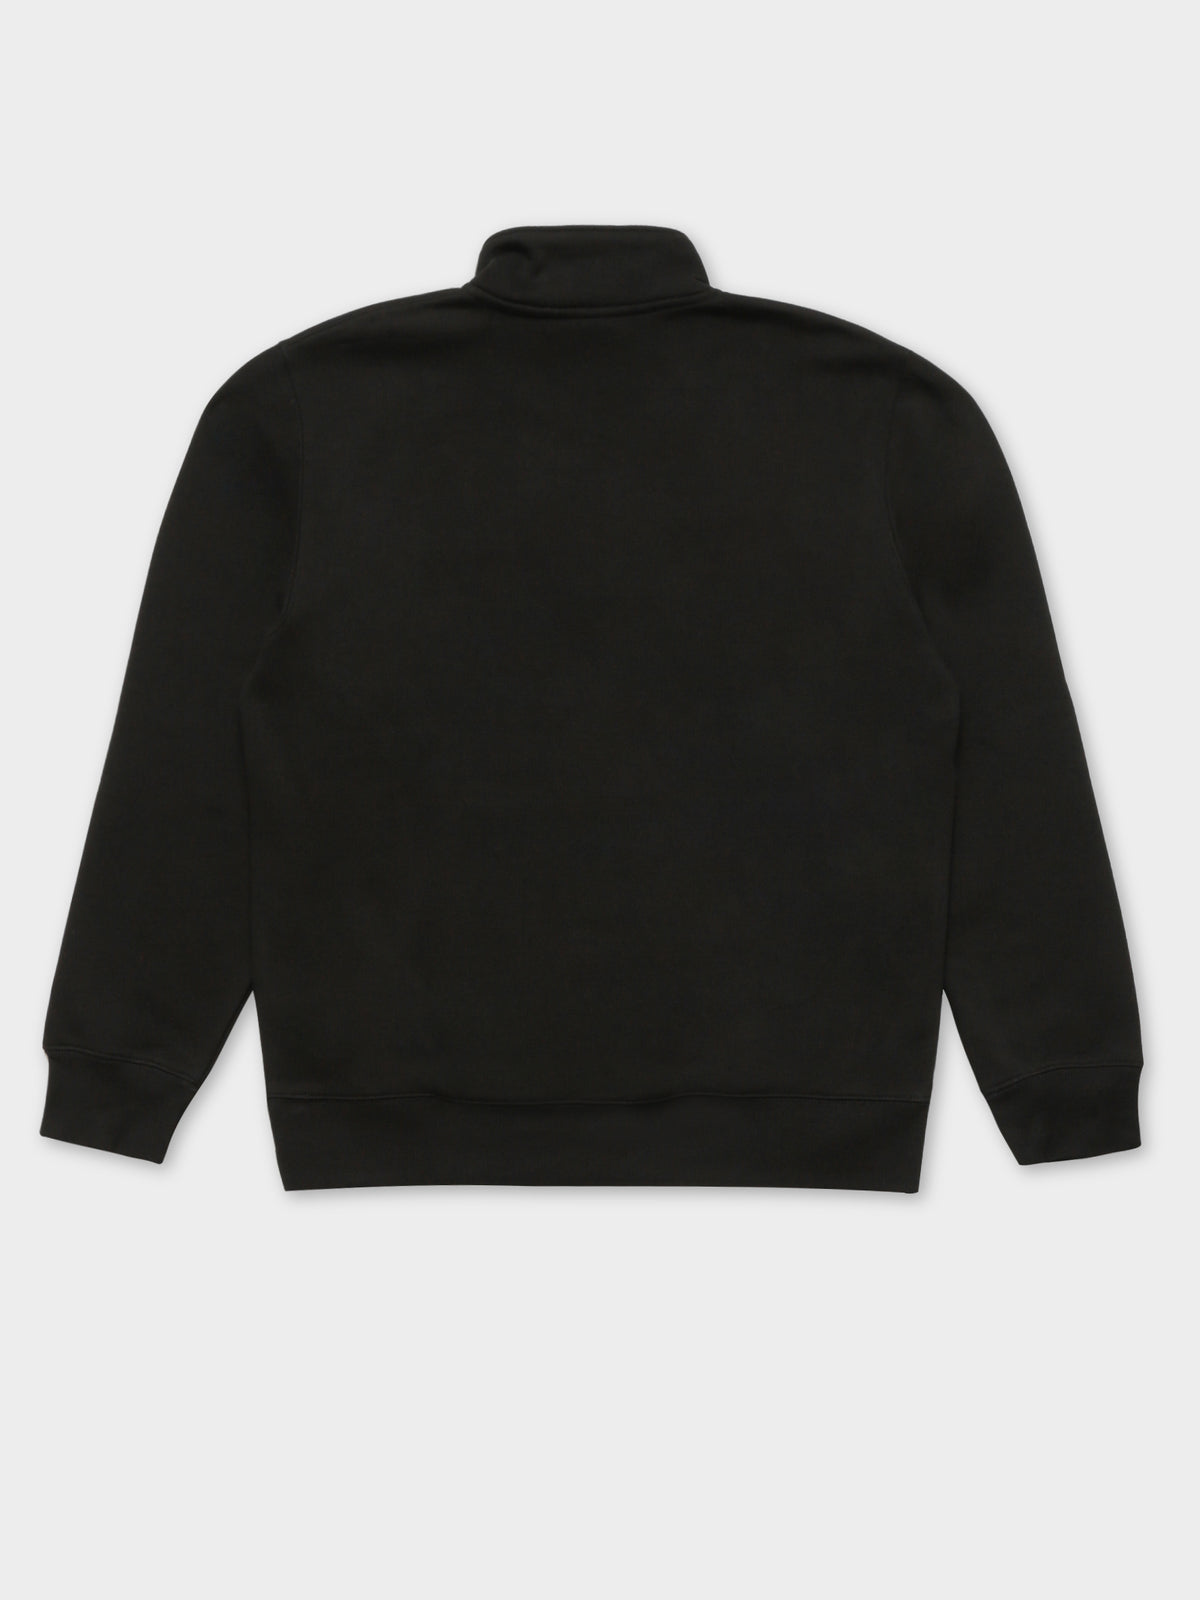 Chase Neck Zip Sweat in Black